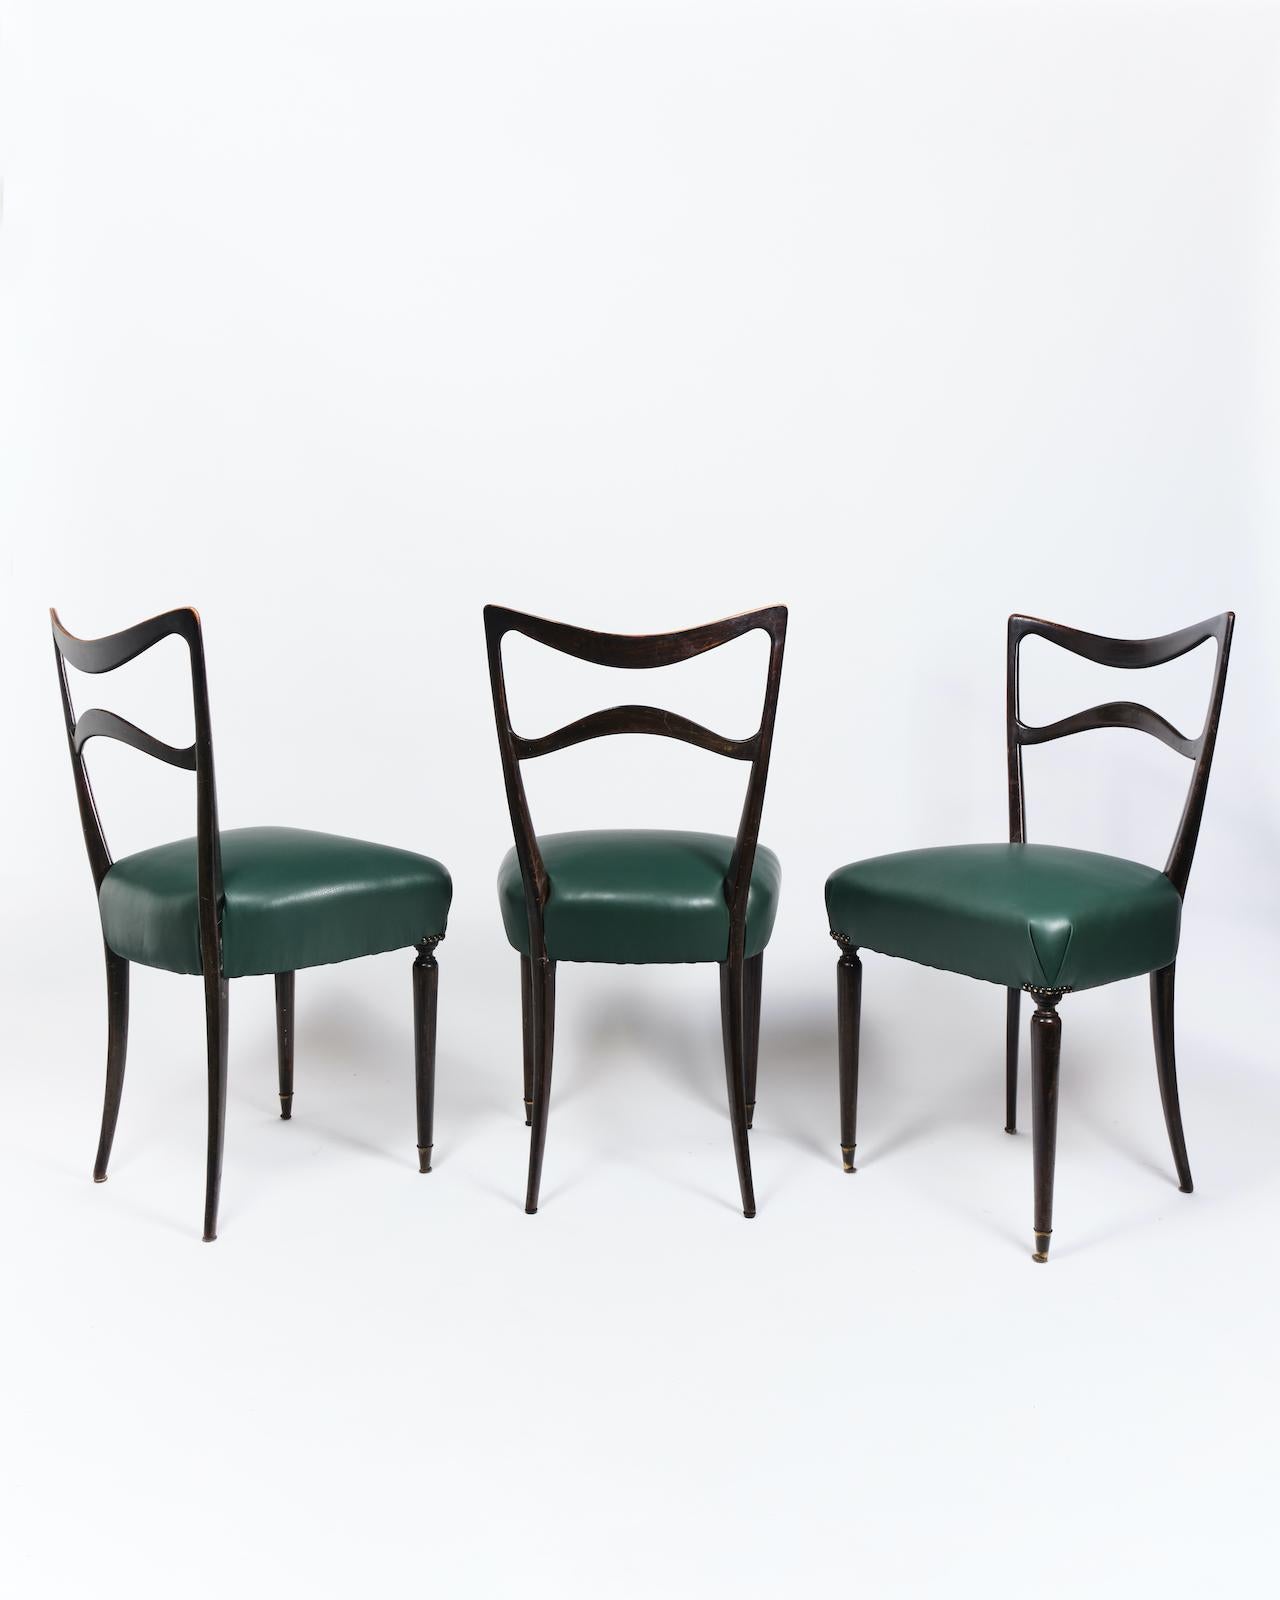 Set of six Italian mid-century modern dining chairs, designed circa 1950. 

The chairs are presented in stained wood with new upholstery in turquoise and supported by brass feet. 